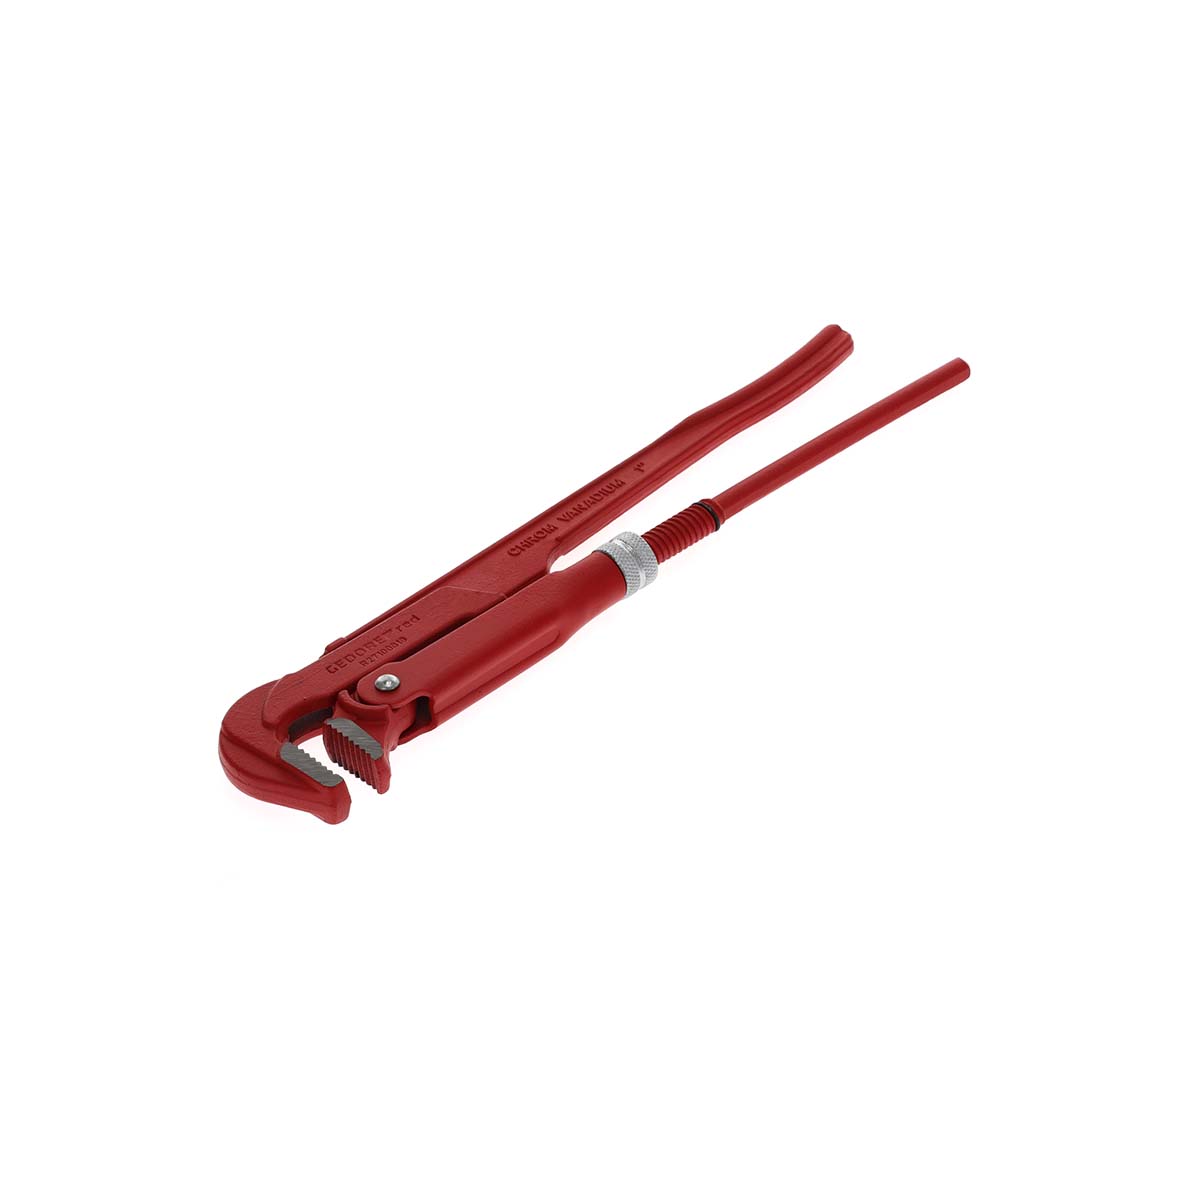 GEDORE rouge R27100010 - Pince à tube avec embouchure 90°, 320mm (3301157)